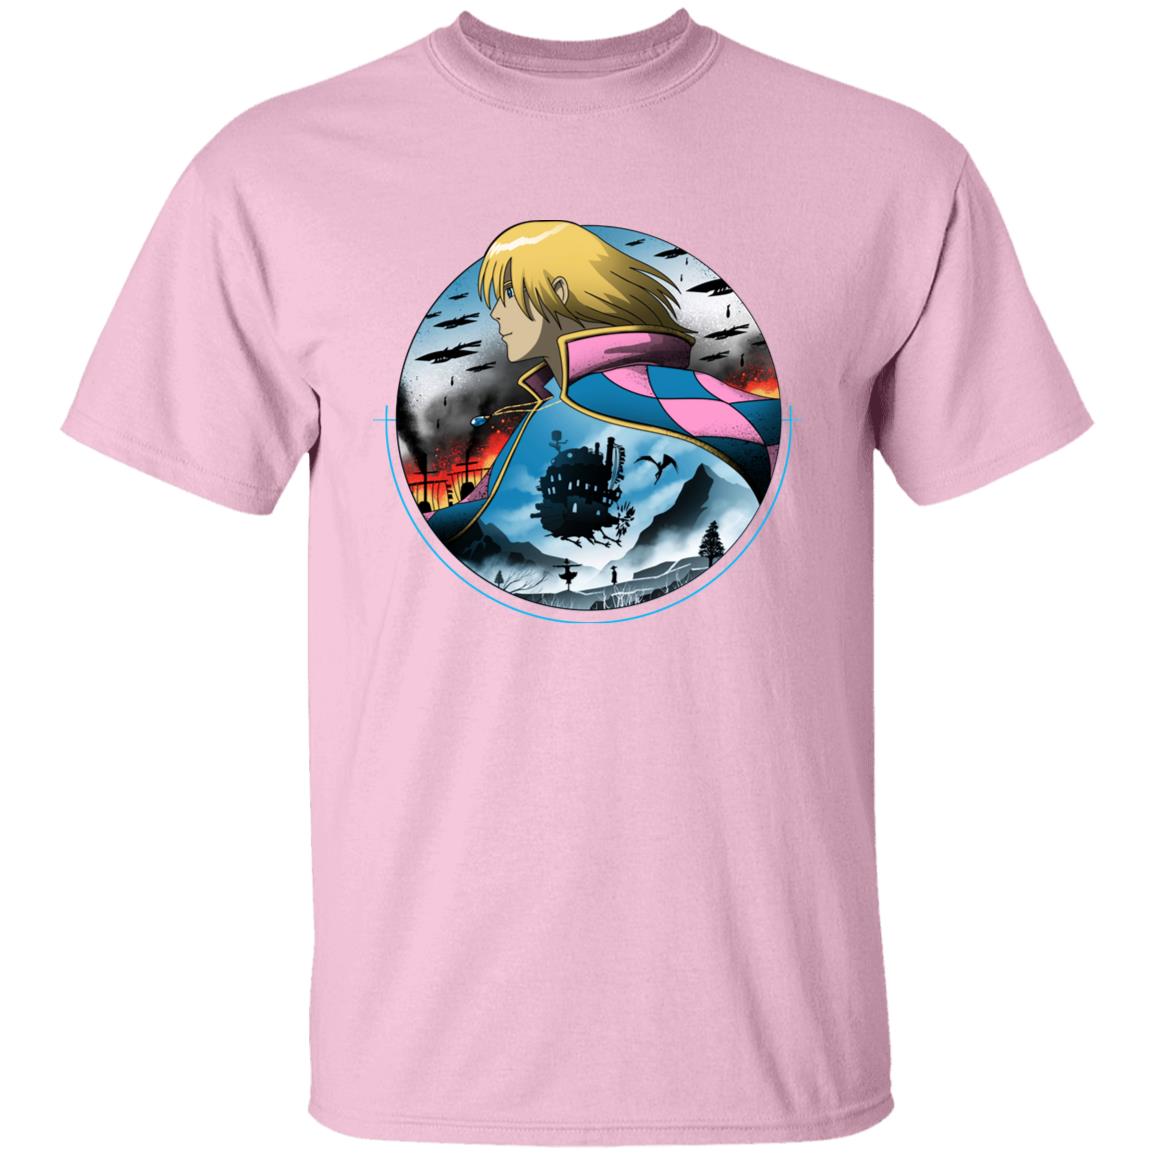 Howl’s Moving Castle – The Journey T Shirt